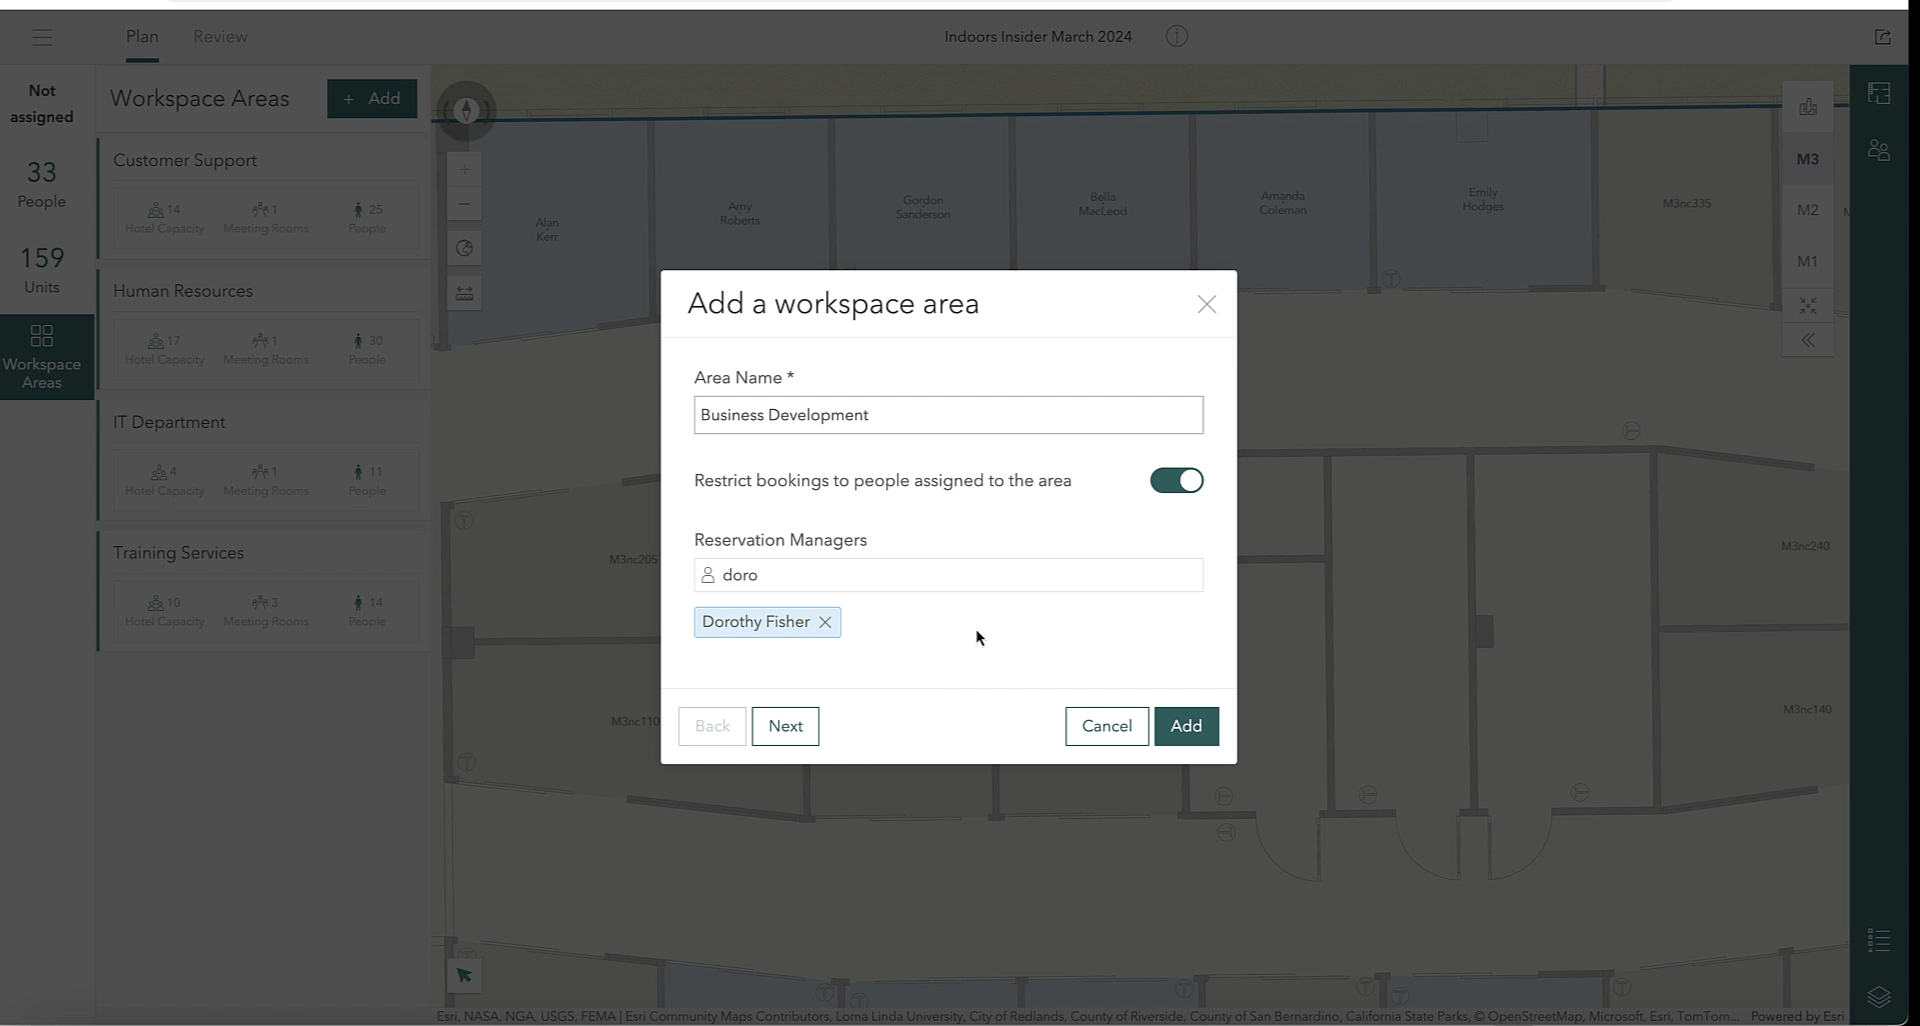 ArcGIS Indoors space planner - add a workspace area popup windor on indoor map